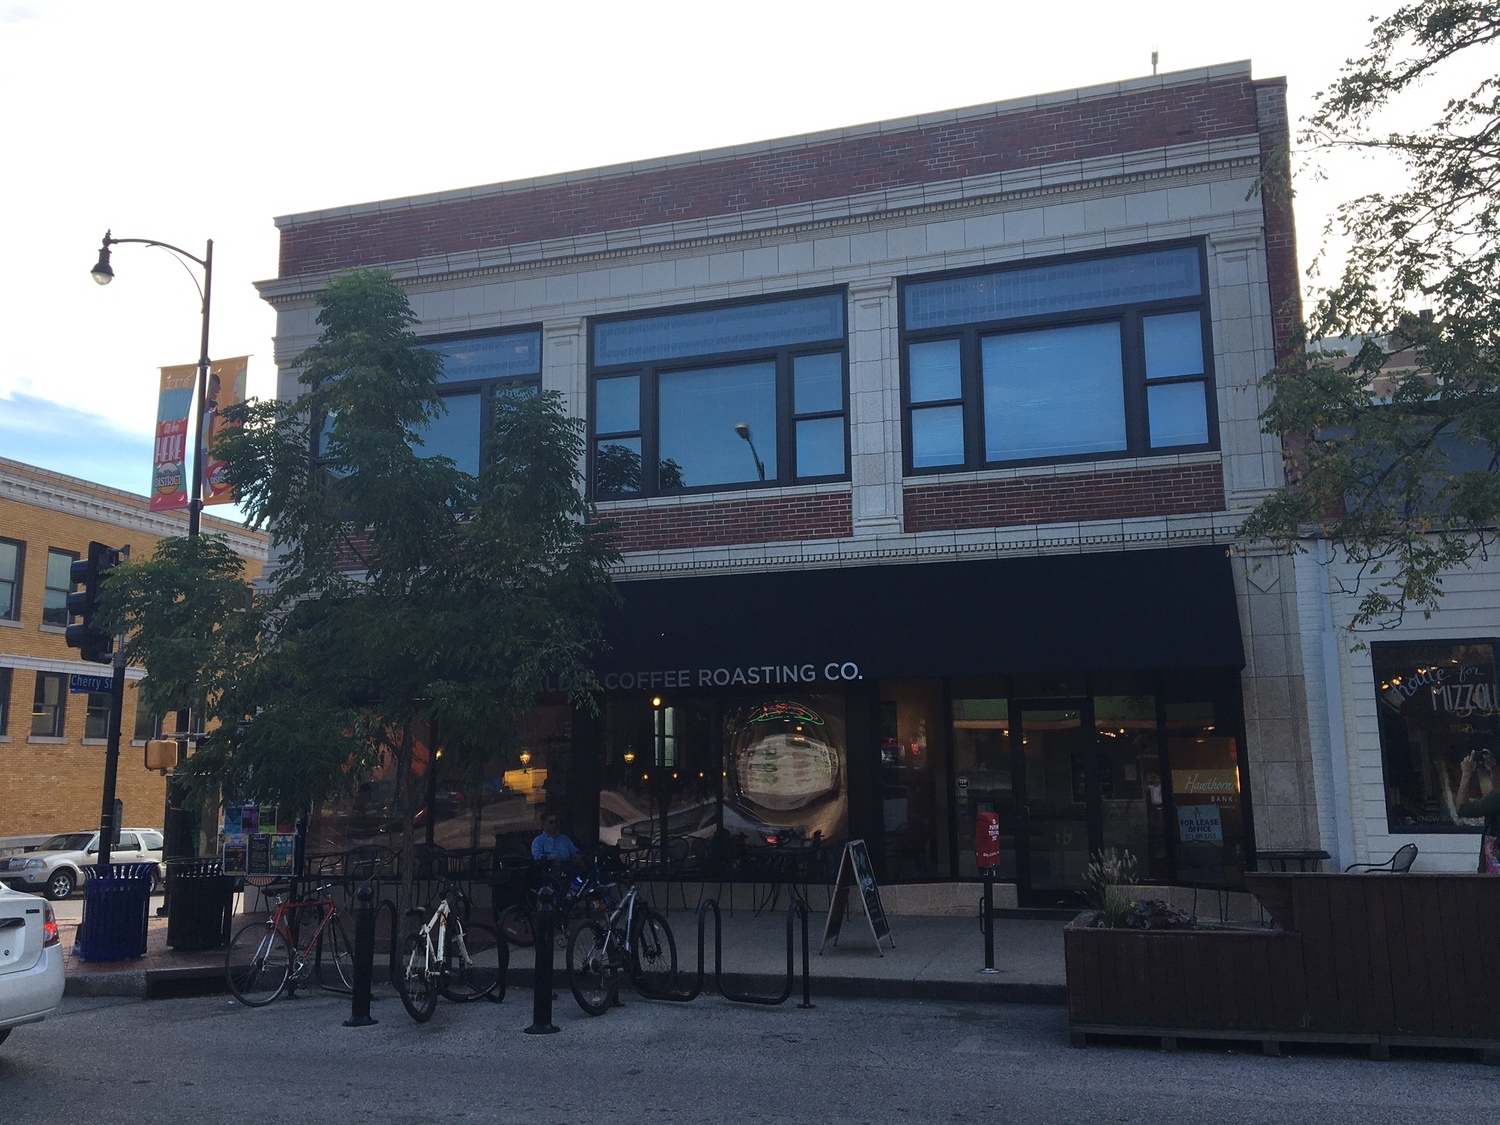 Gallery Photo of Located above Kaldis Coffee in downtown Columbia, MO